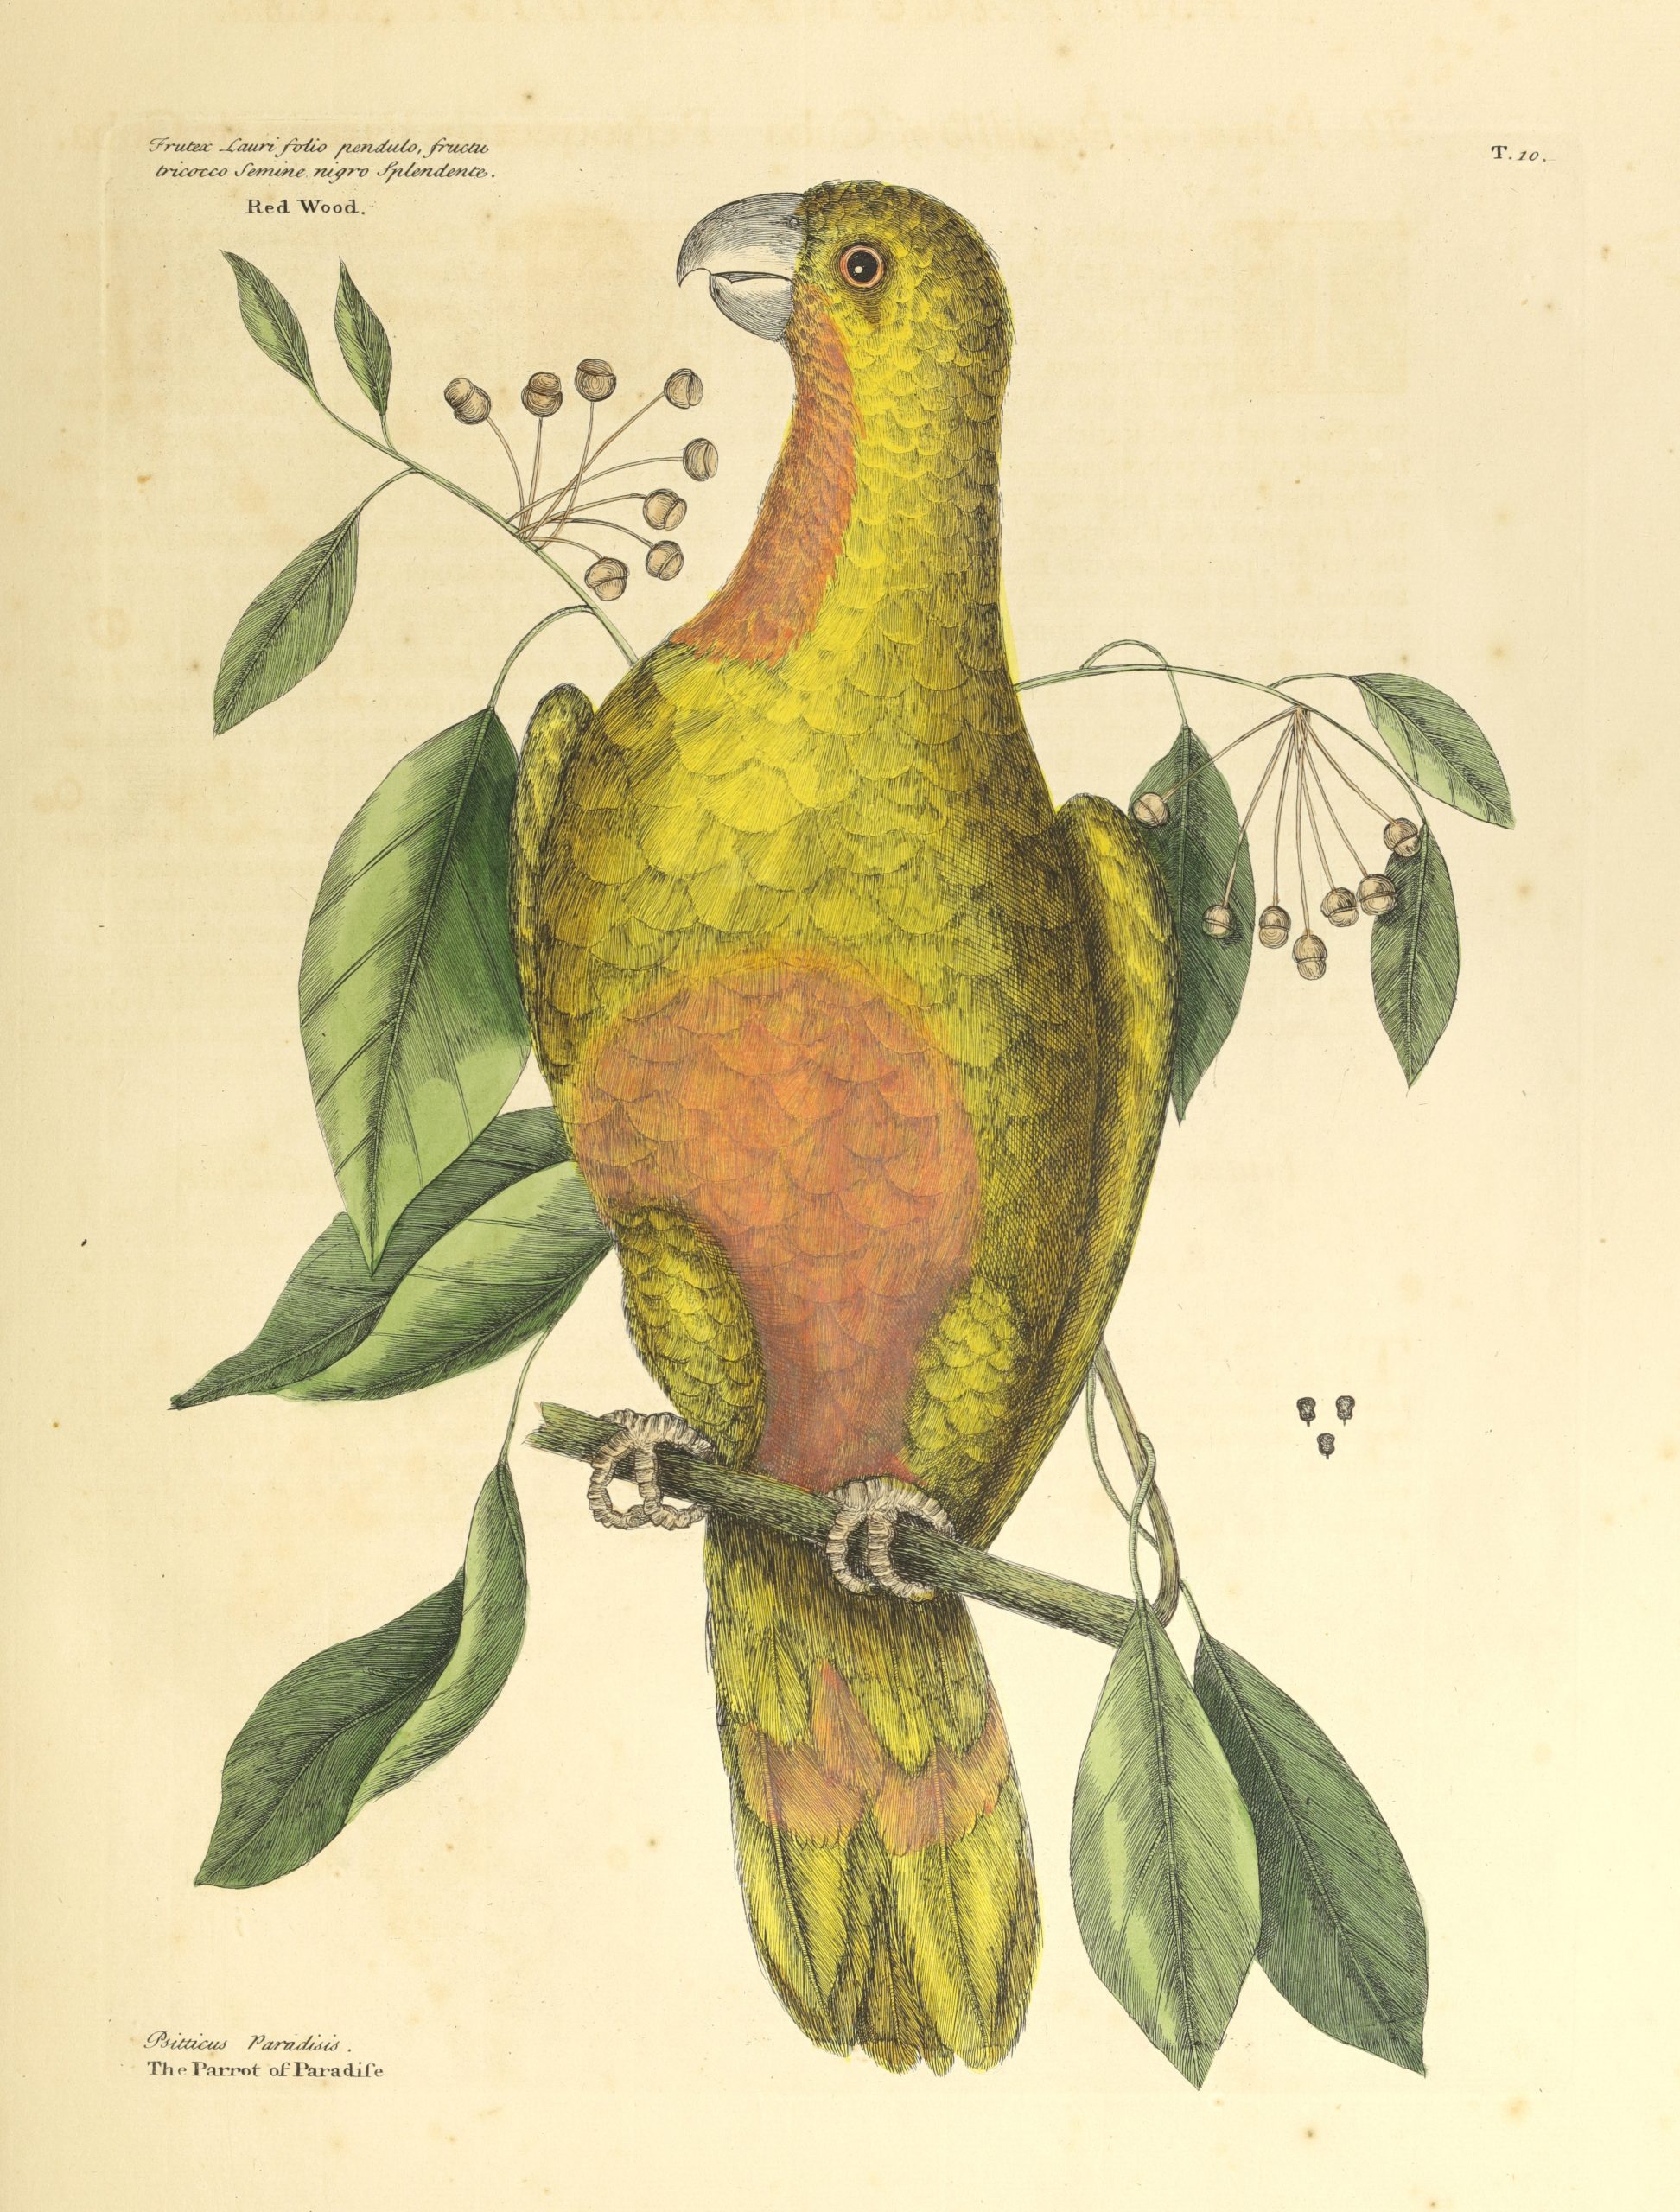 The bird-of-paradise. Photography courtesy of The Irvin Department of Rare Books and Special Collections, University of South Carolina Libraries, Columbia.